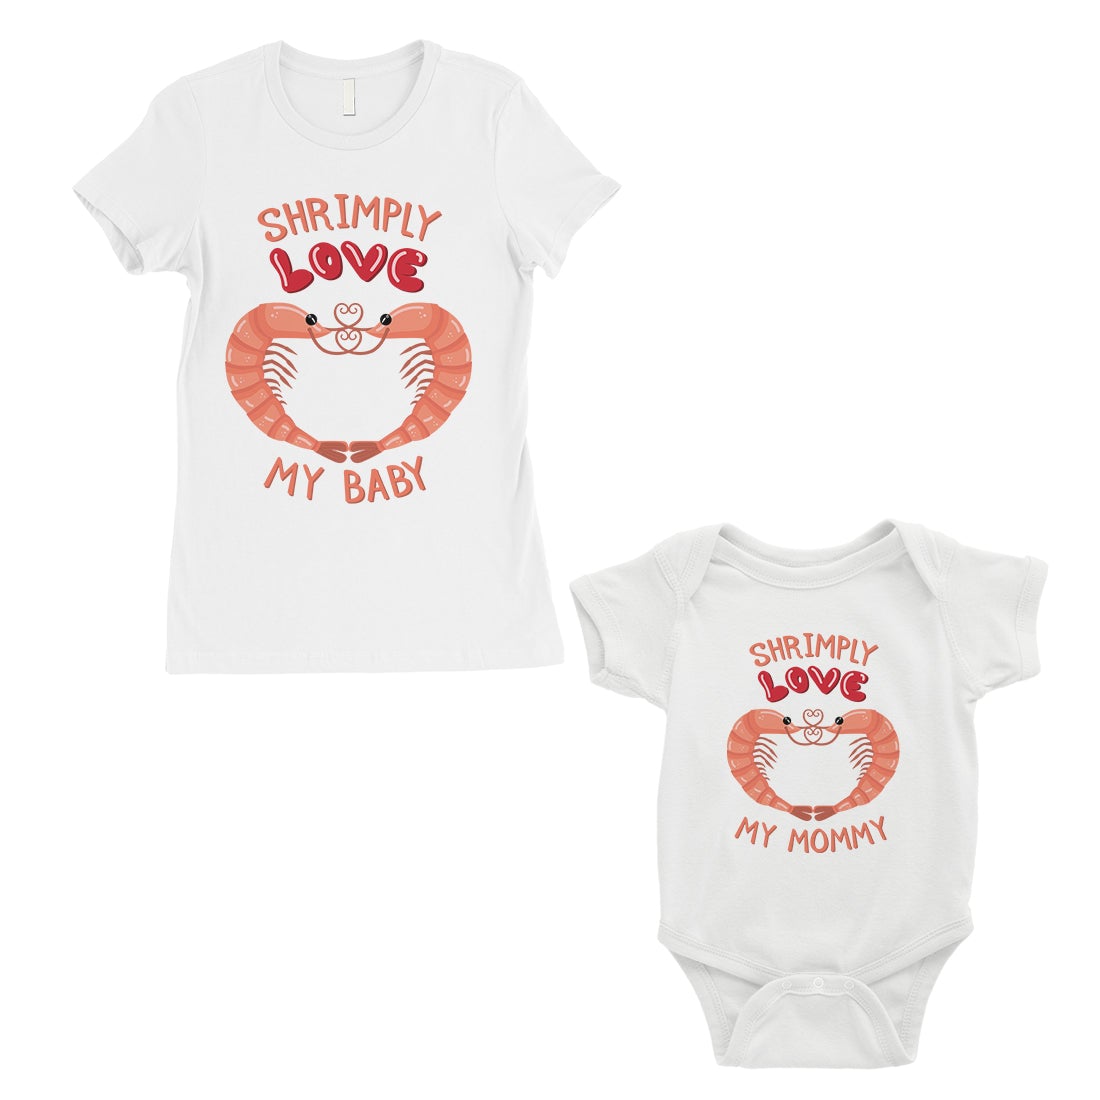 Shrimply Love Baby Mommy Mom and Baby Matching Gift T-Shirts White